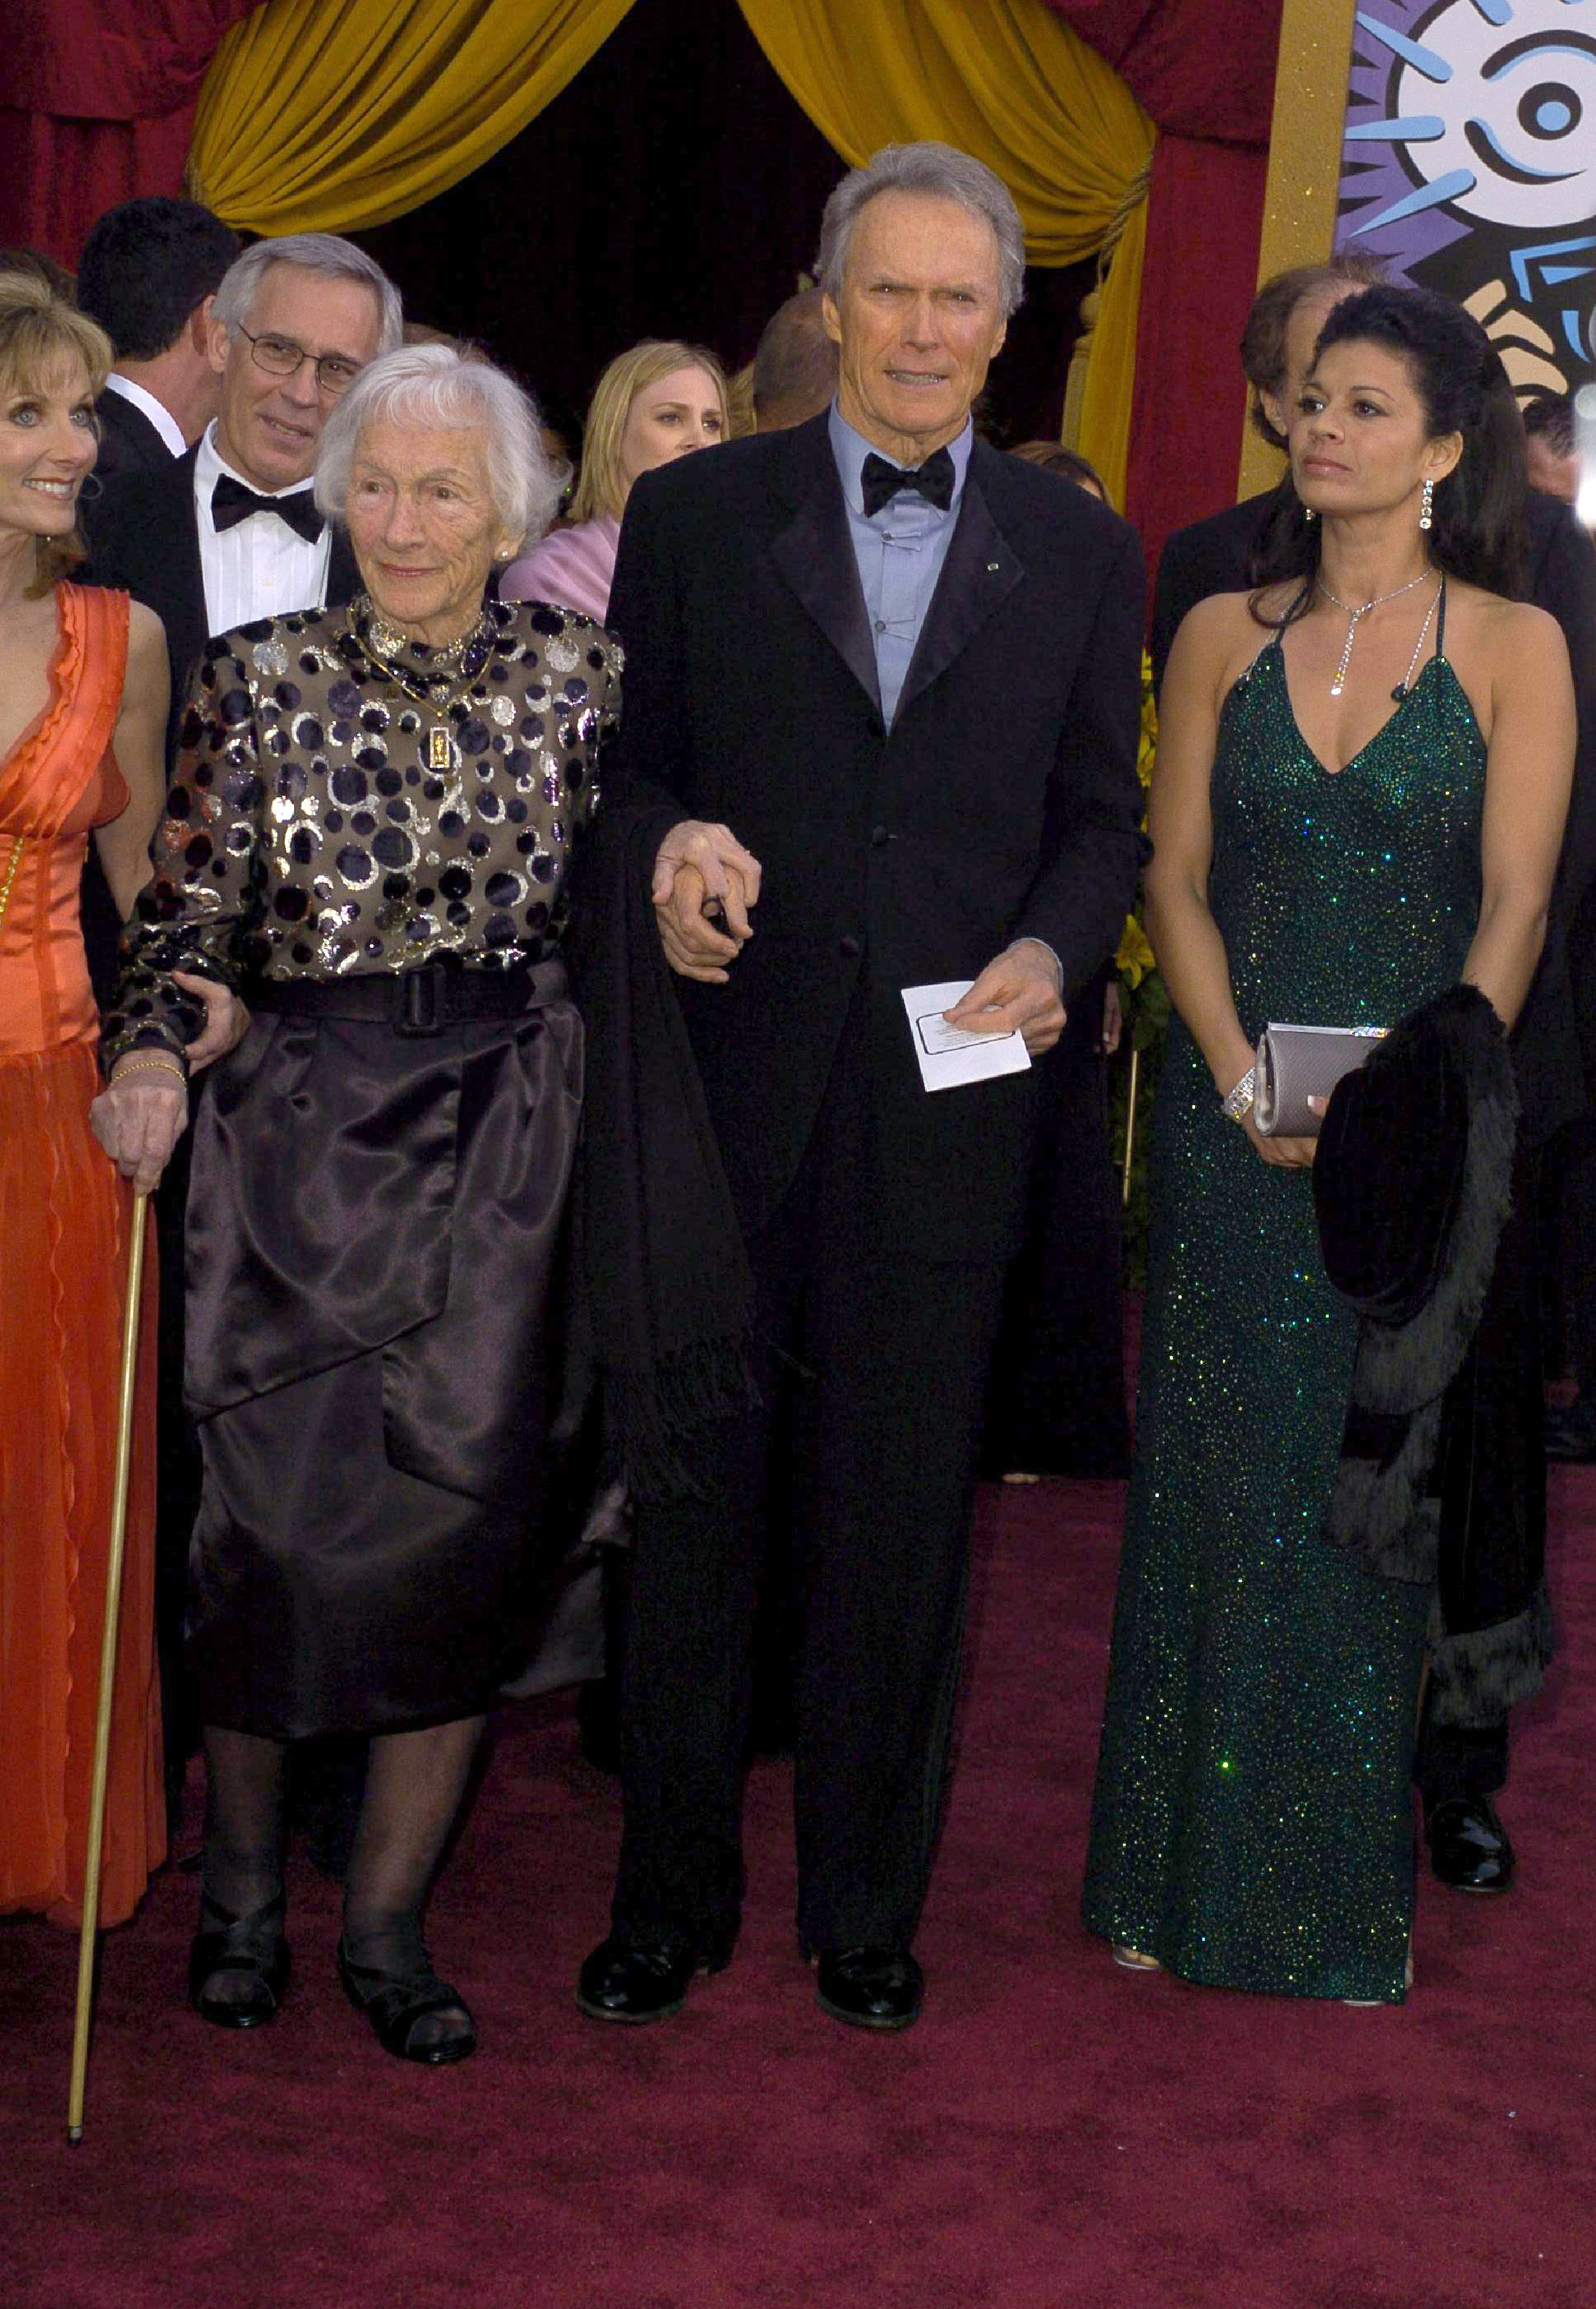 Clint Eastwood with his daughter Laurie Murray, mother Ruth Wood, and ex-wife Dina Eastwood on February 29, 2004, at the 76th Academy Awards | Source: Getty Images